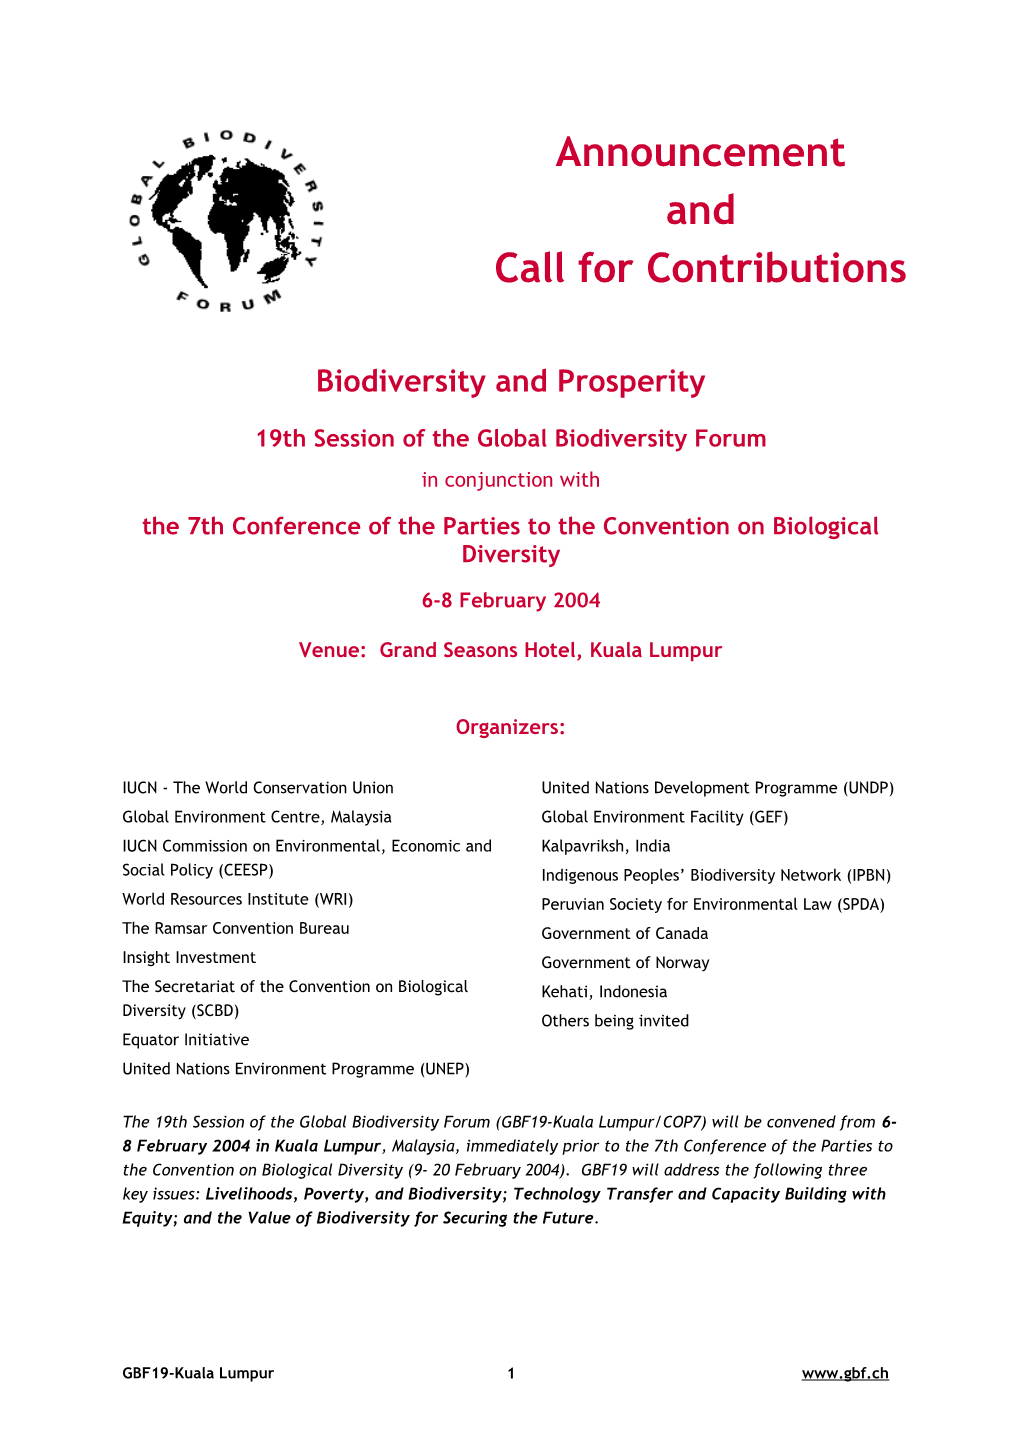 19Th Session of the Global Biodiversity Forum